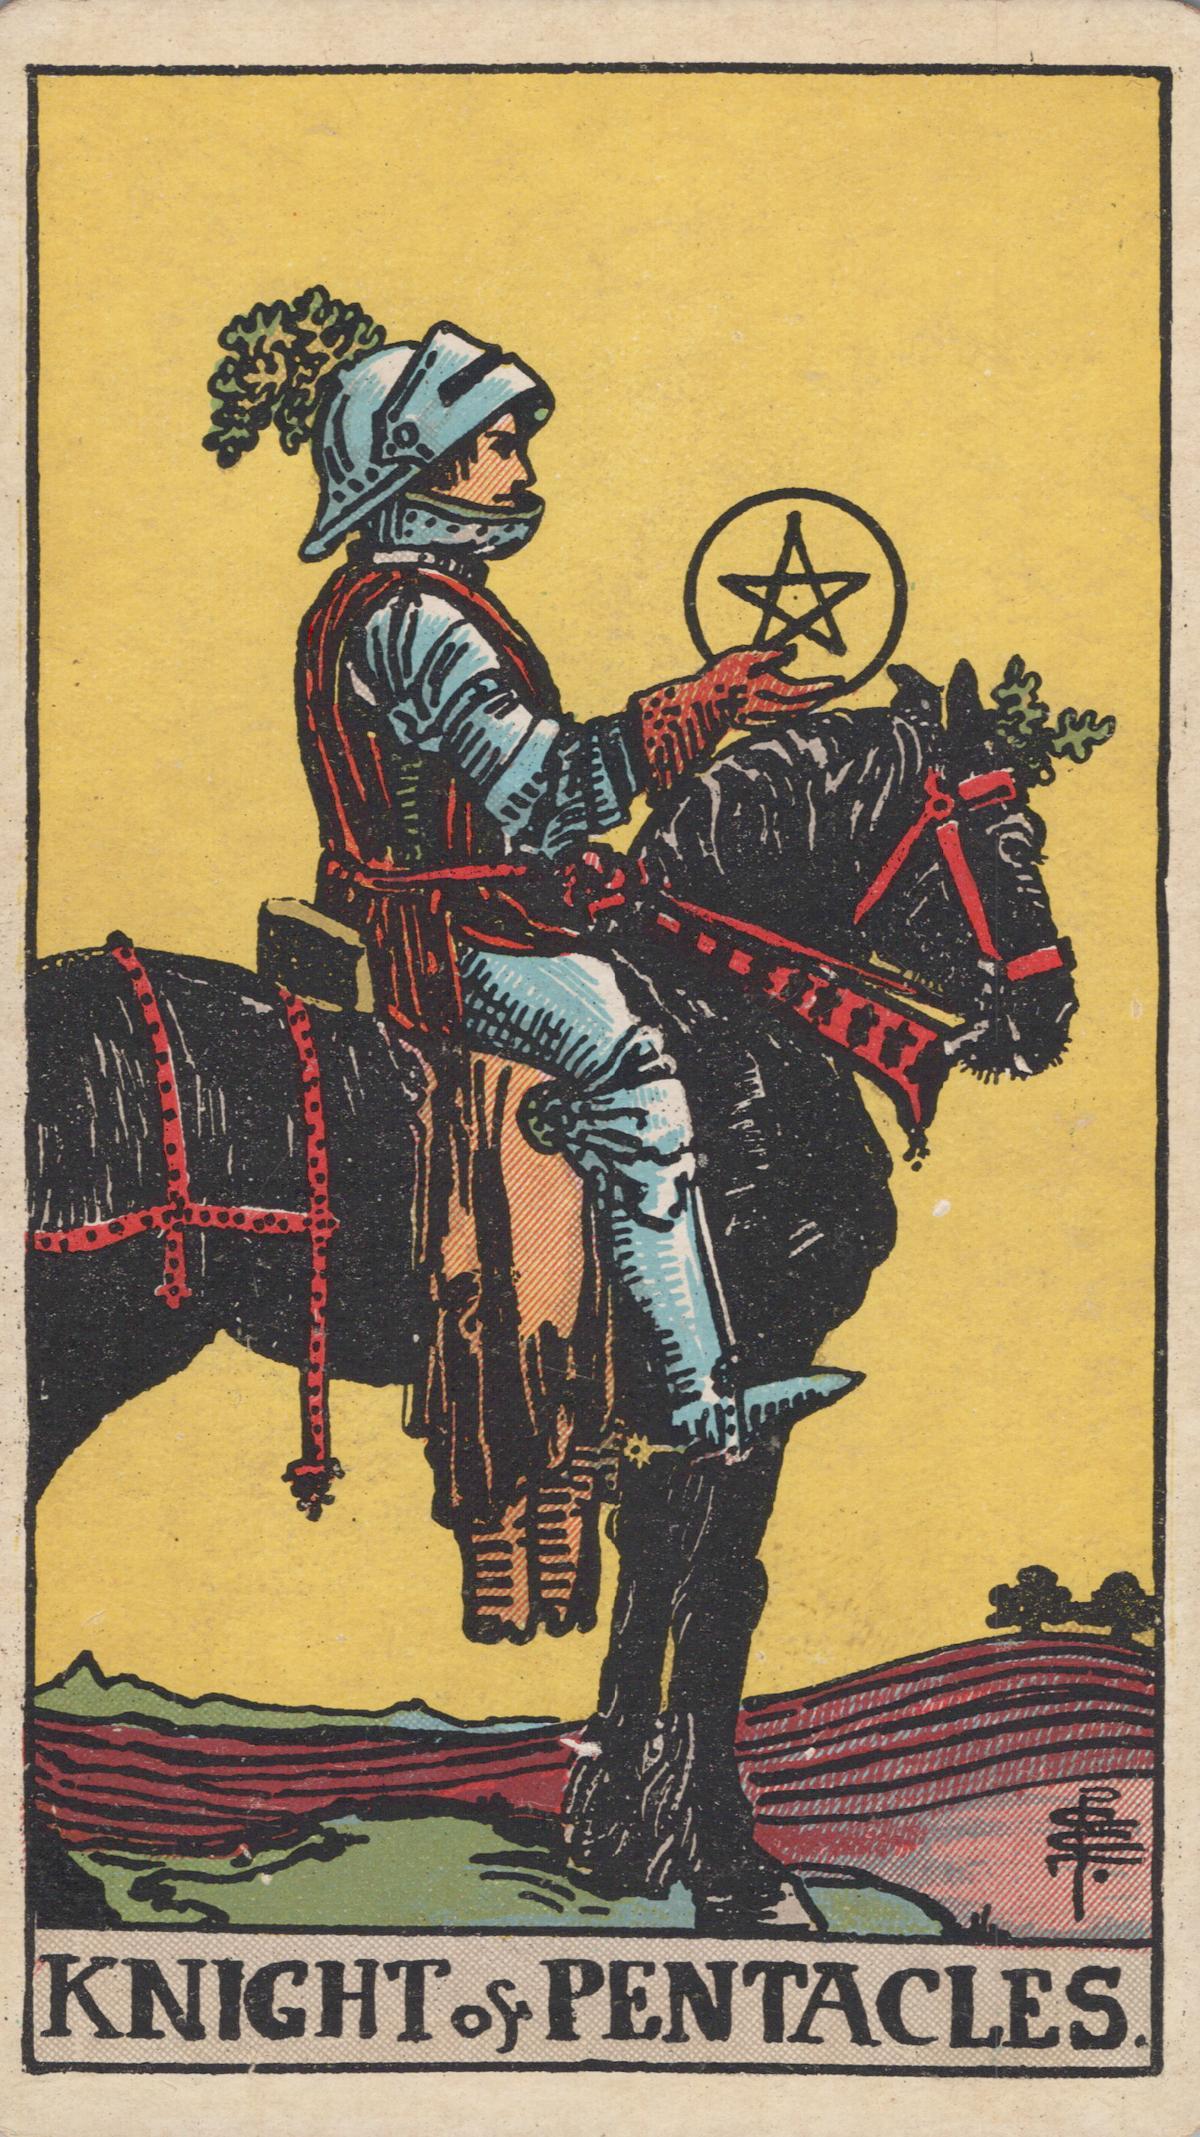 Pentacles - Knight